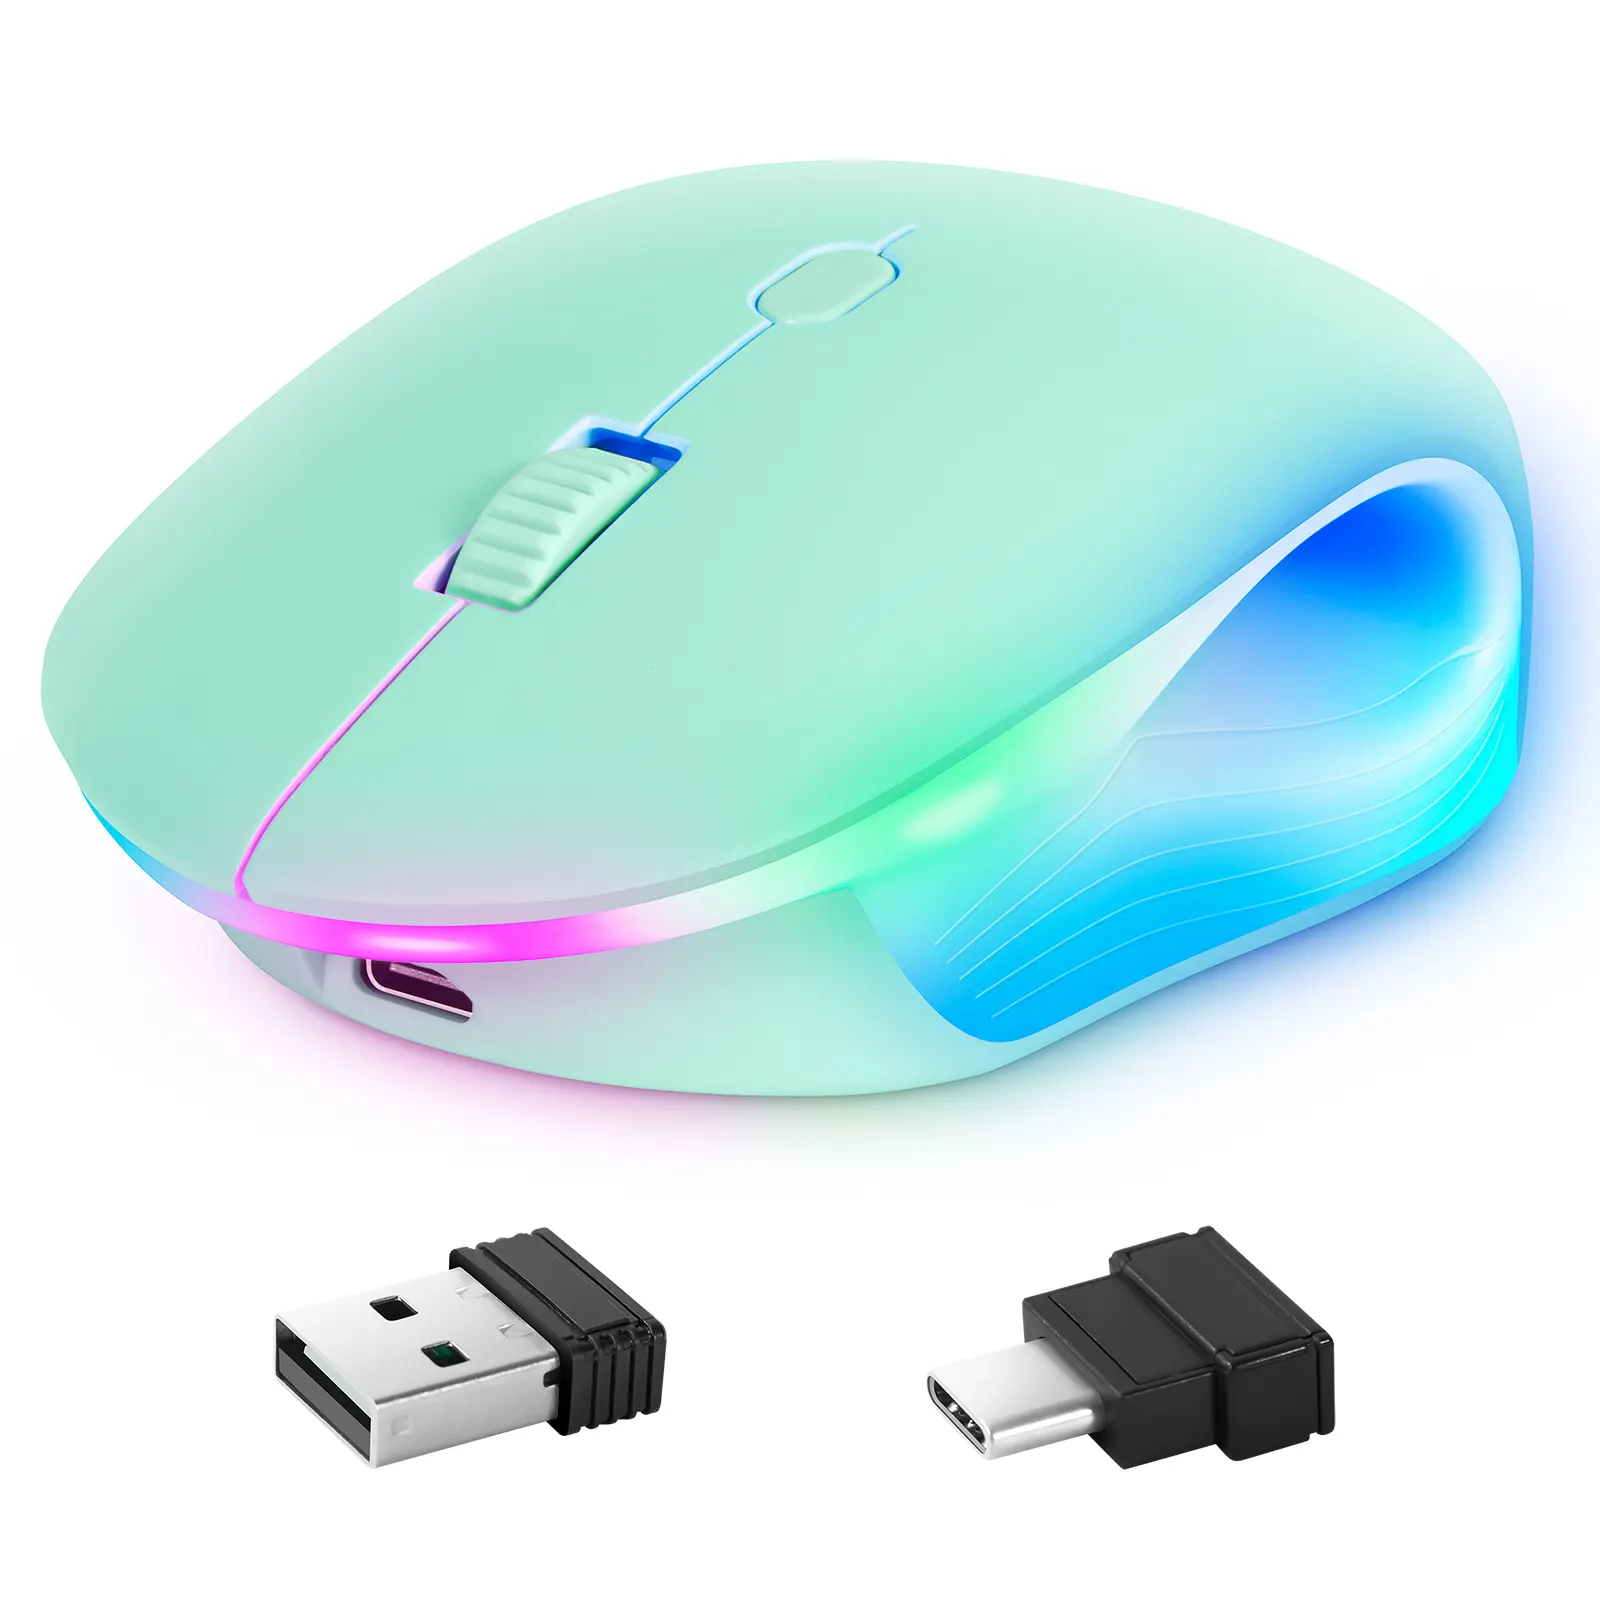 RGB Wireless Mouse Rechargeable Computer Mouse Mice with Colorful LED Lights Silent Click 2.4G USB Nano Receiver3 Level DPI